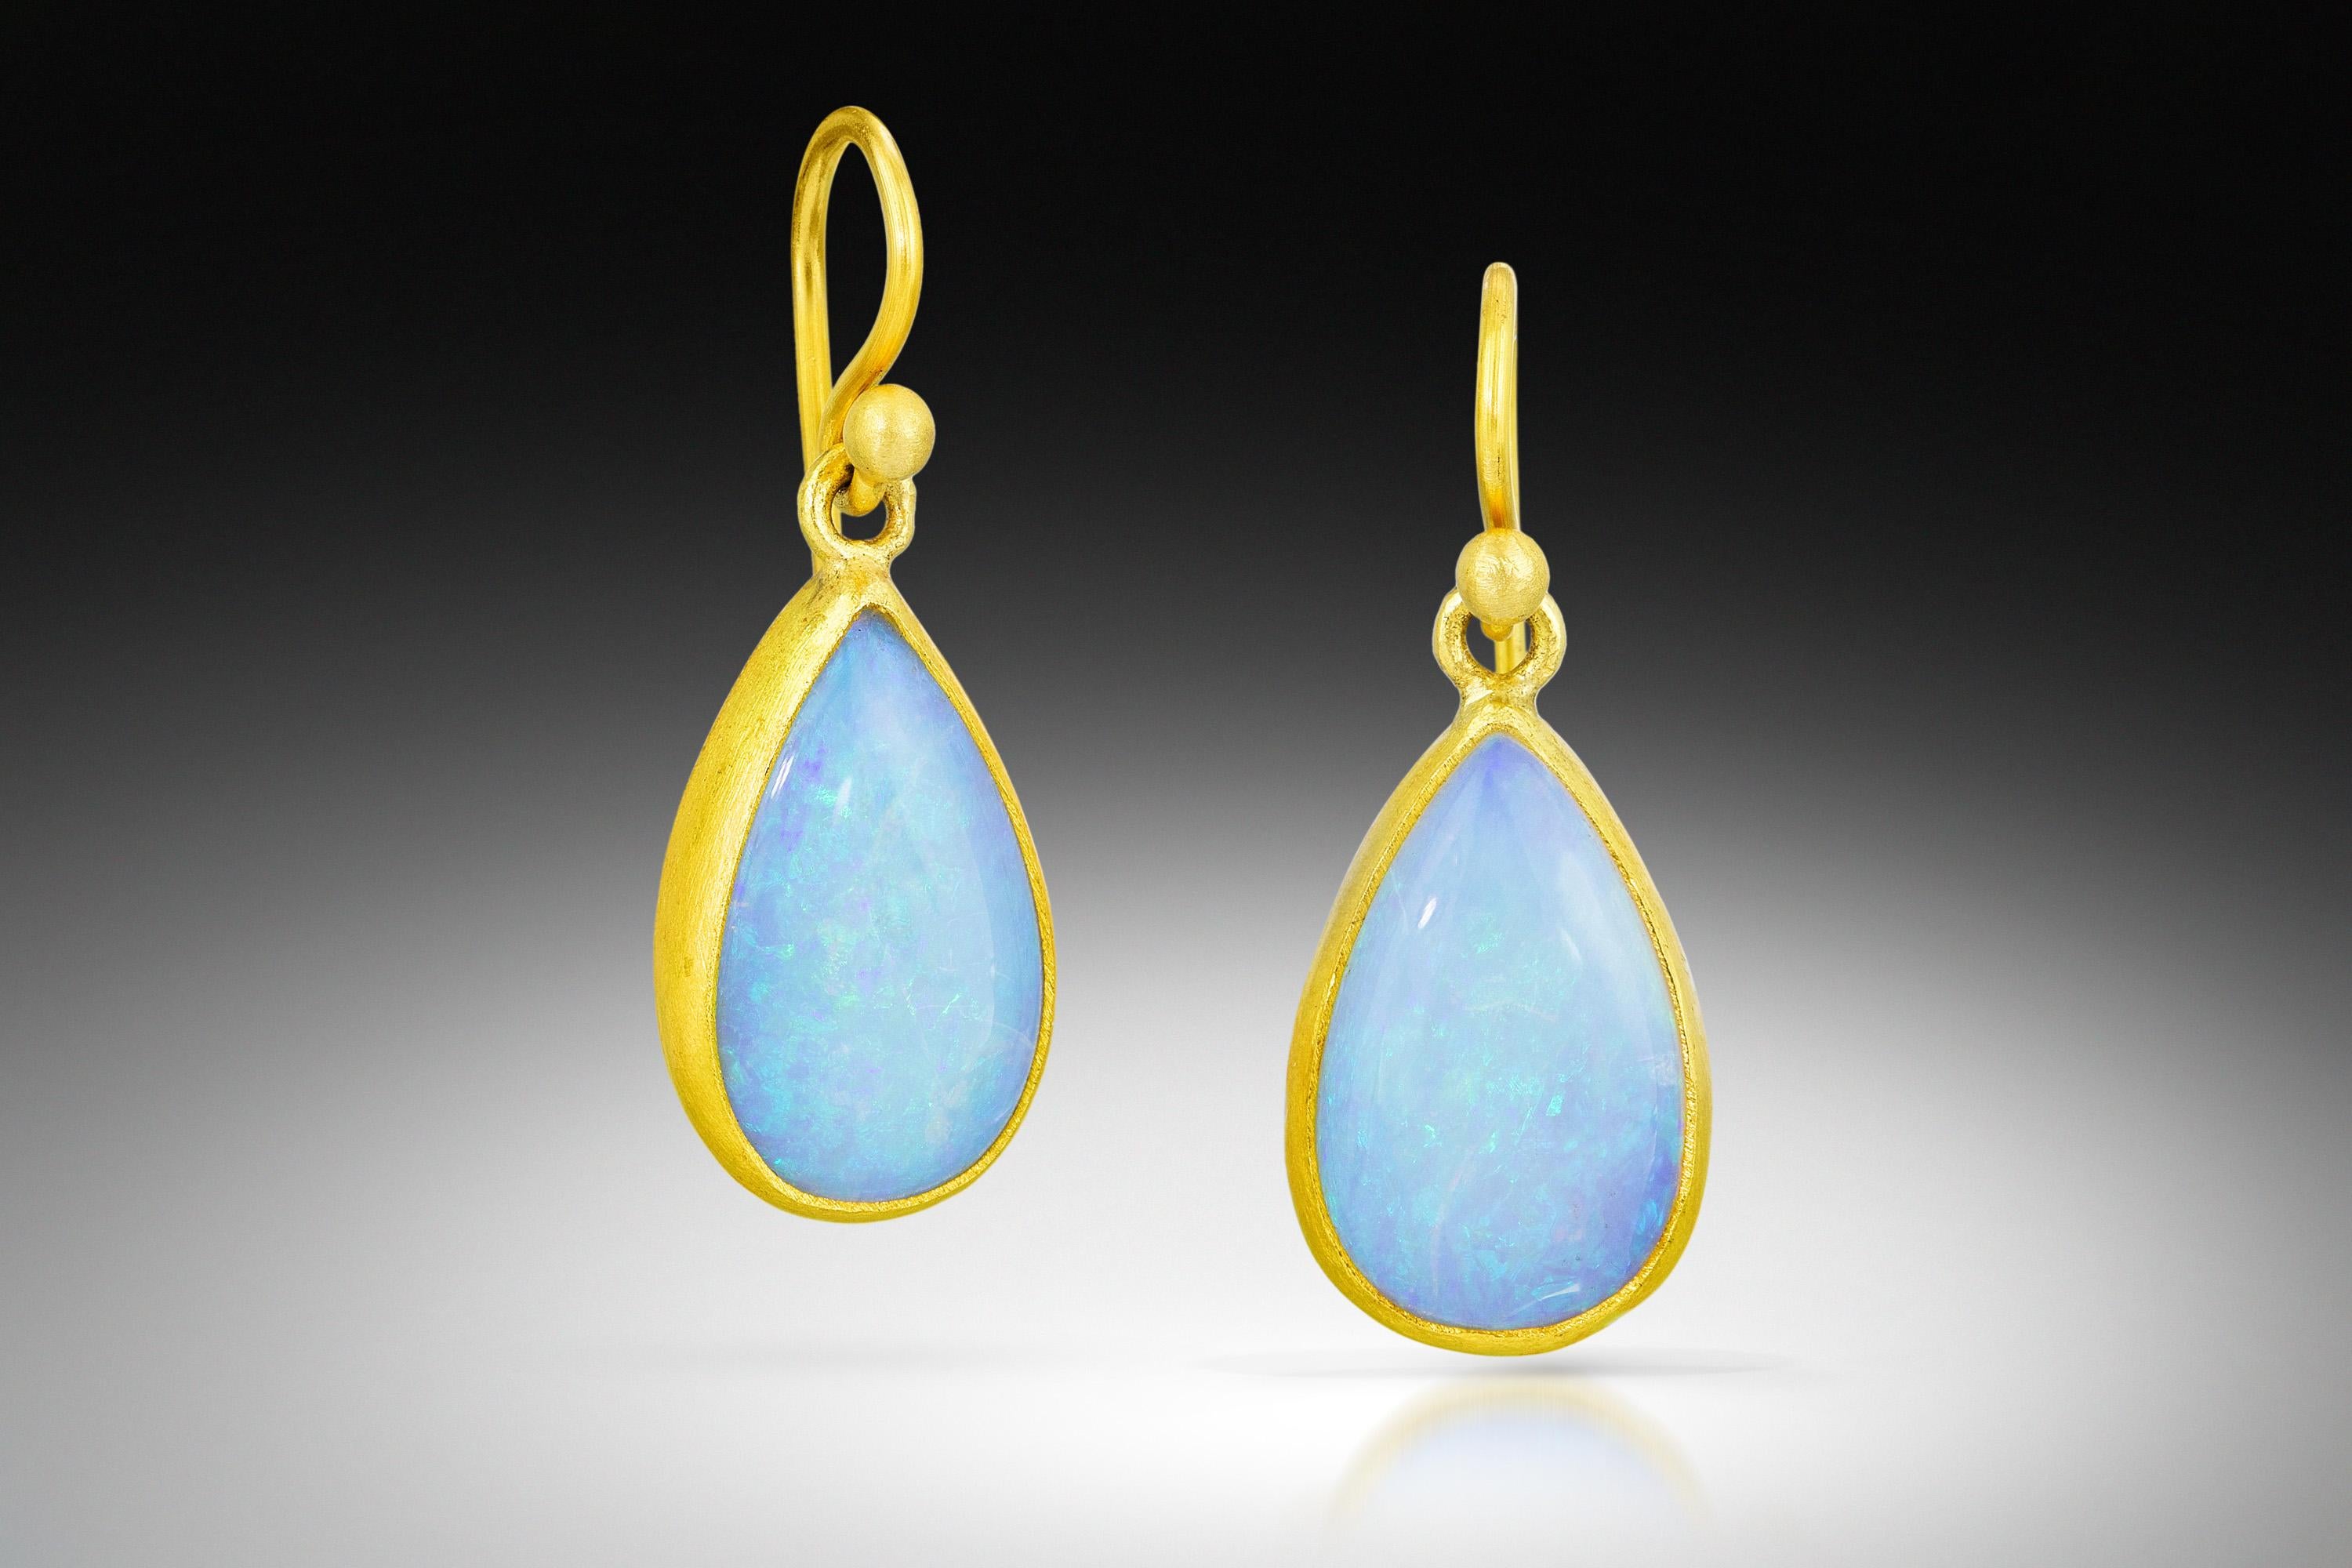 Stephanie Albertson handcrafted 22K gold & Australian opal earrings. A perfectly matched pair of stunning Australian pear shaped cabochon opals bezel set in Stephanie's signature matte-satin 22K gold, hanging from a delicate French earwire. Stamped